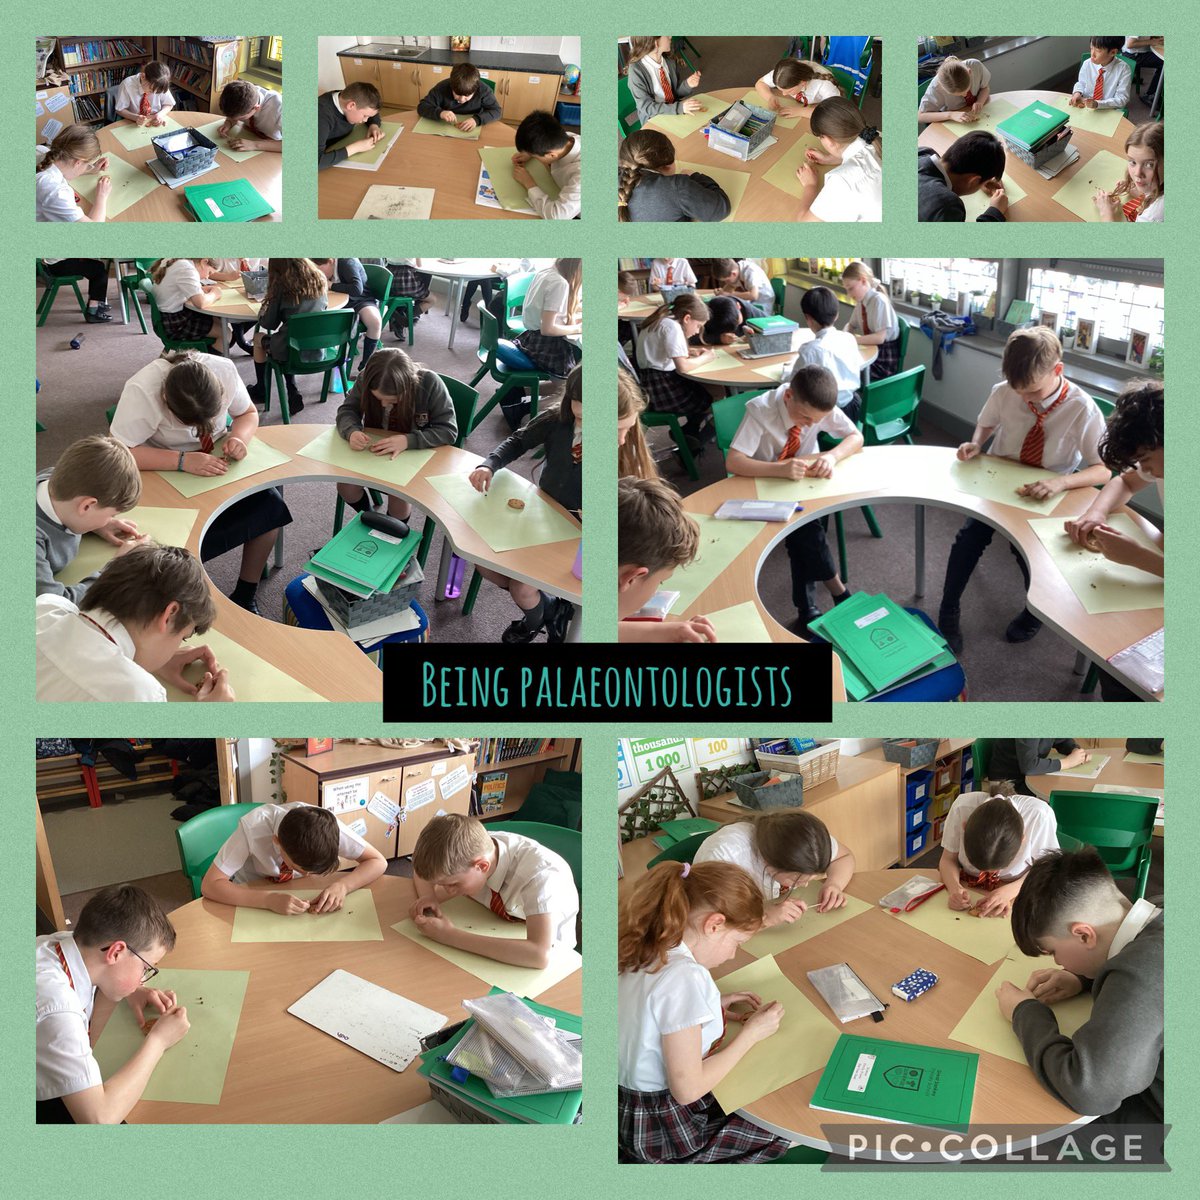 We’re having a go at being palaeontologists this afternoon. It really isn’t easy chipping away really carefully so as not to damage the fossil/biscuit!
#greatsankeyscience